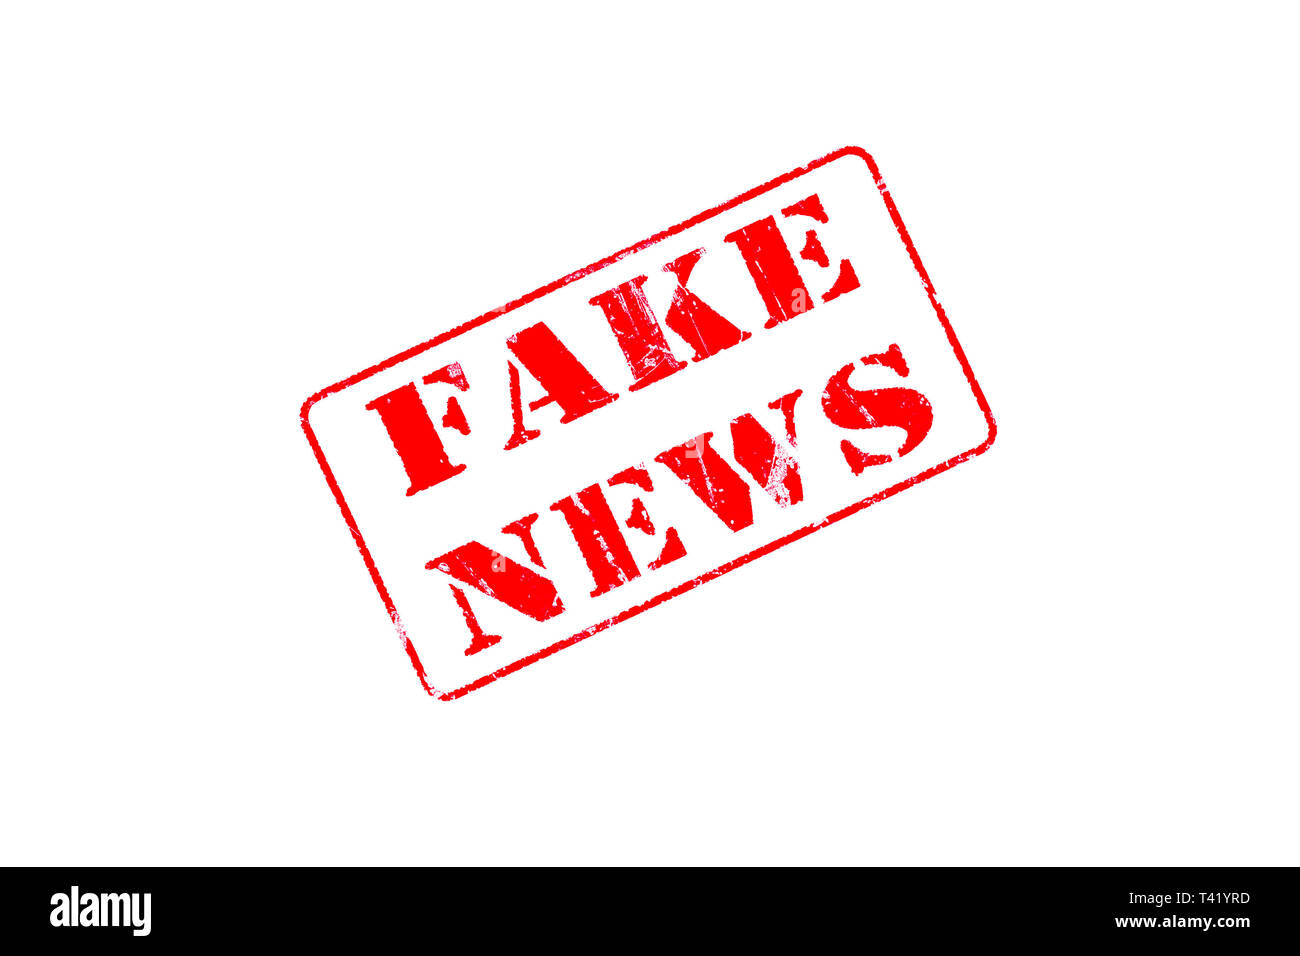 Rubber stamp concept showing a red stamp reading Fake News Stock Photo ...